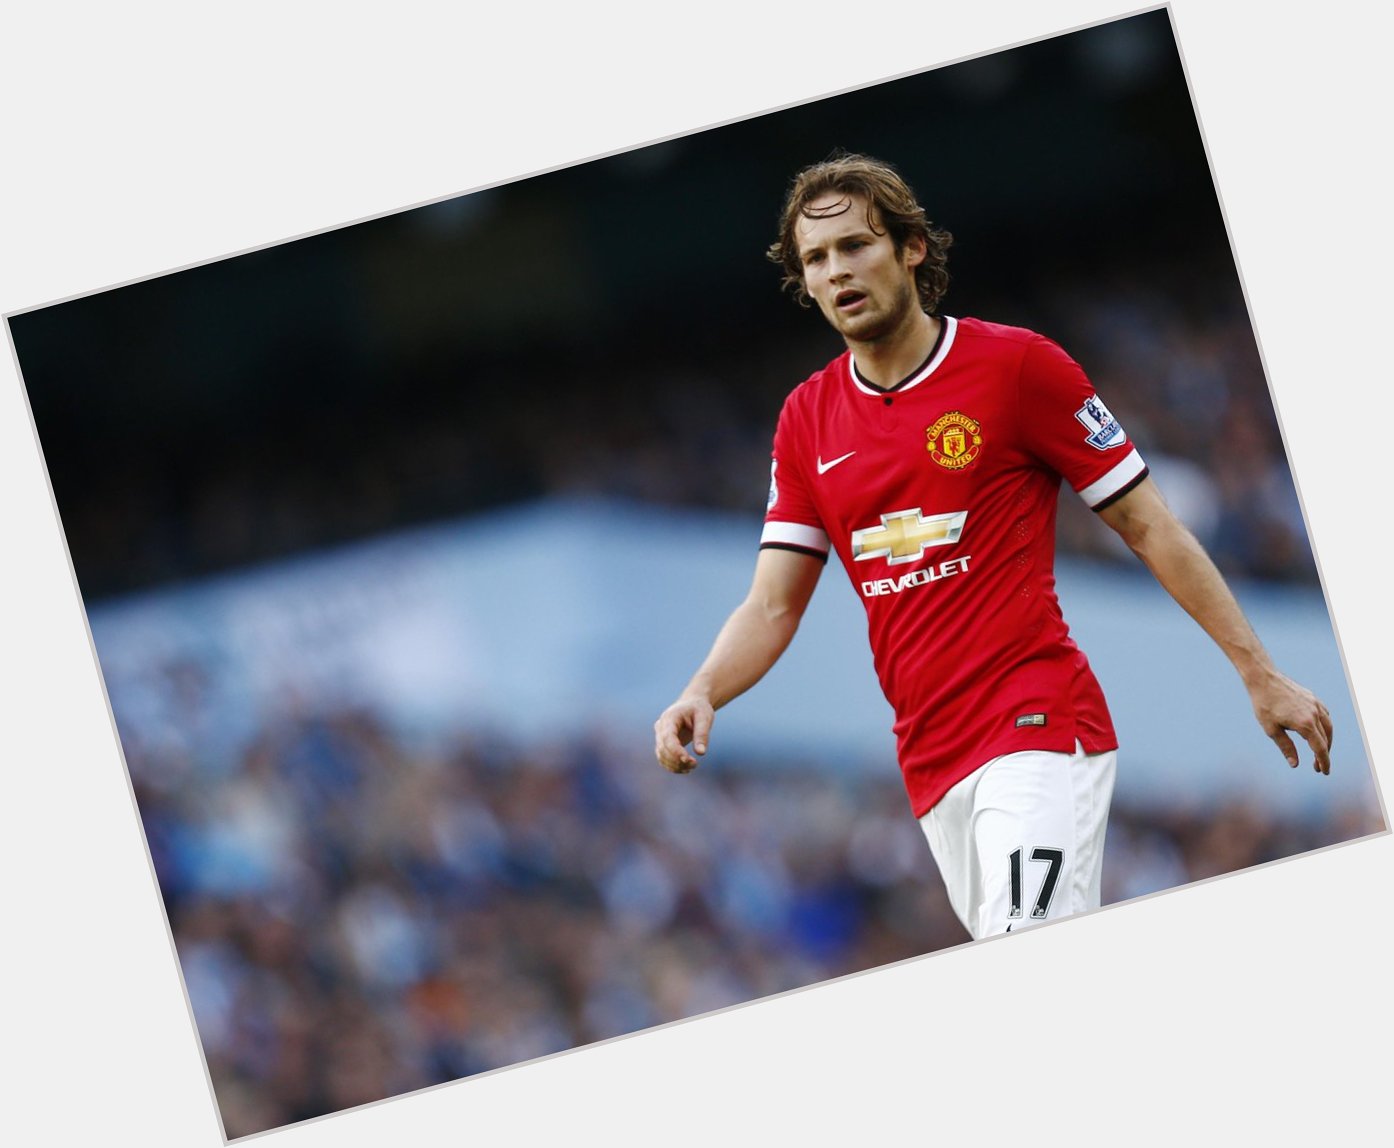 Happy 25th birthday to Daley Blind. No Premier League player had made more interceptions in 2015 than him (38). 